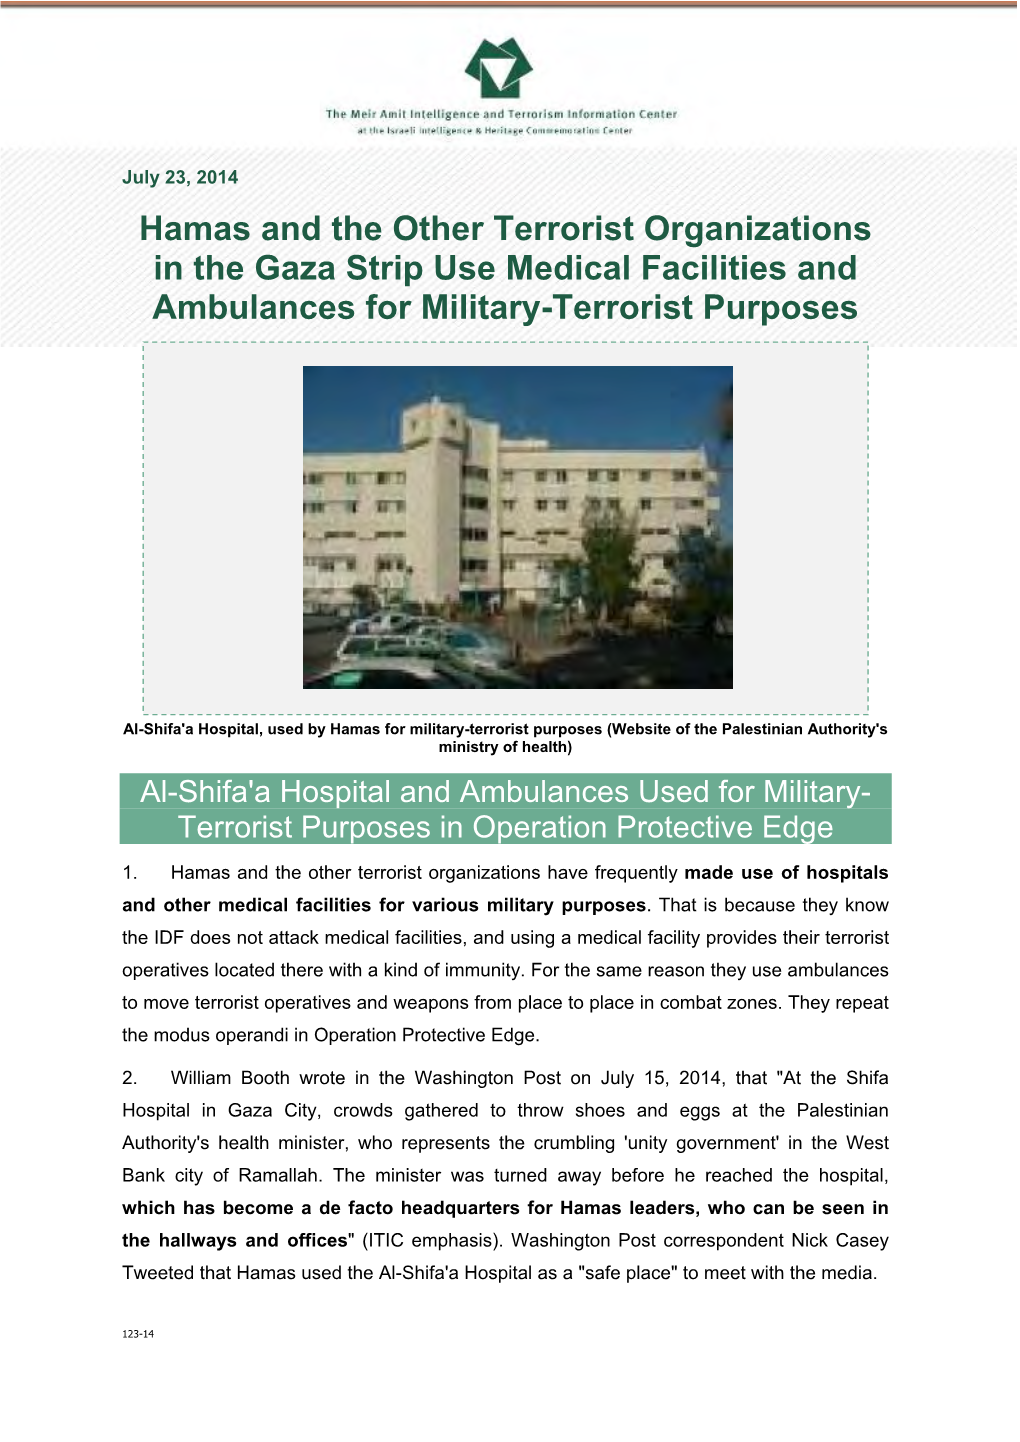 Hamas and the Other Terrorist Organizations in the Gaza Strip Use Medical Facilities and Ambulances for Military-Terrorist Purposes